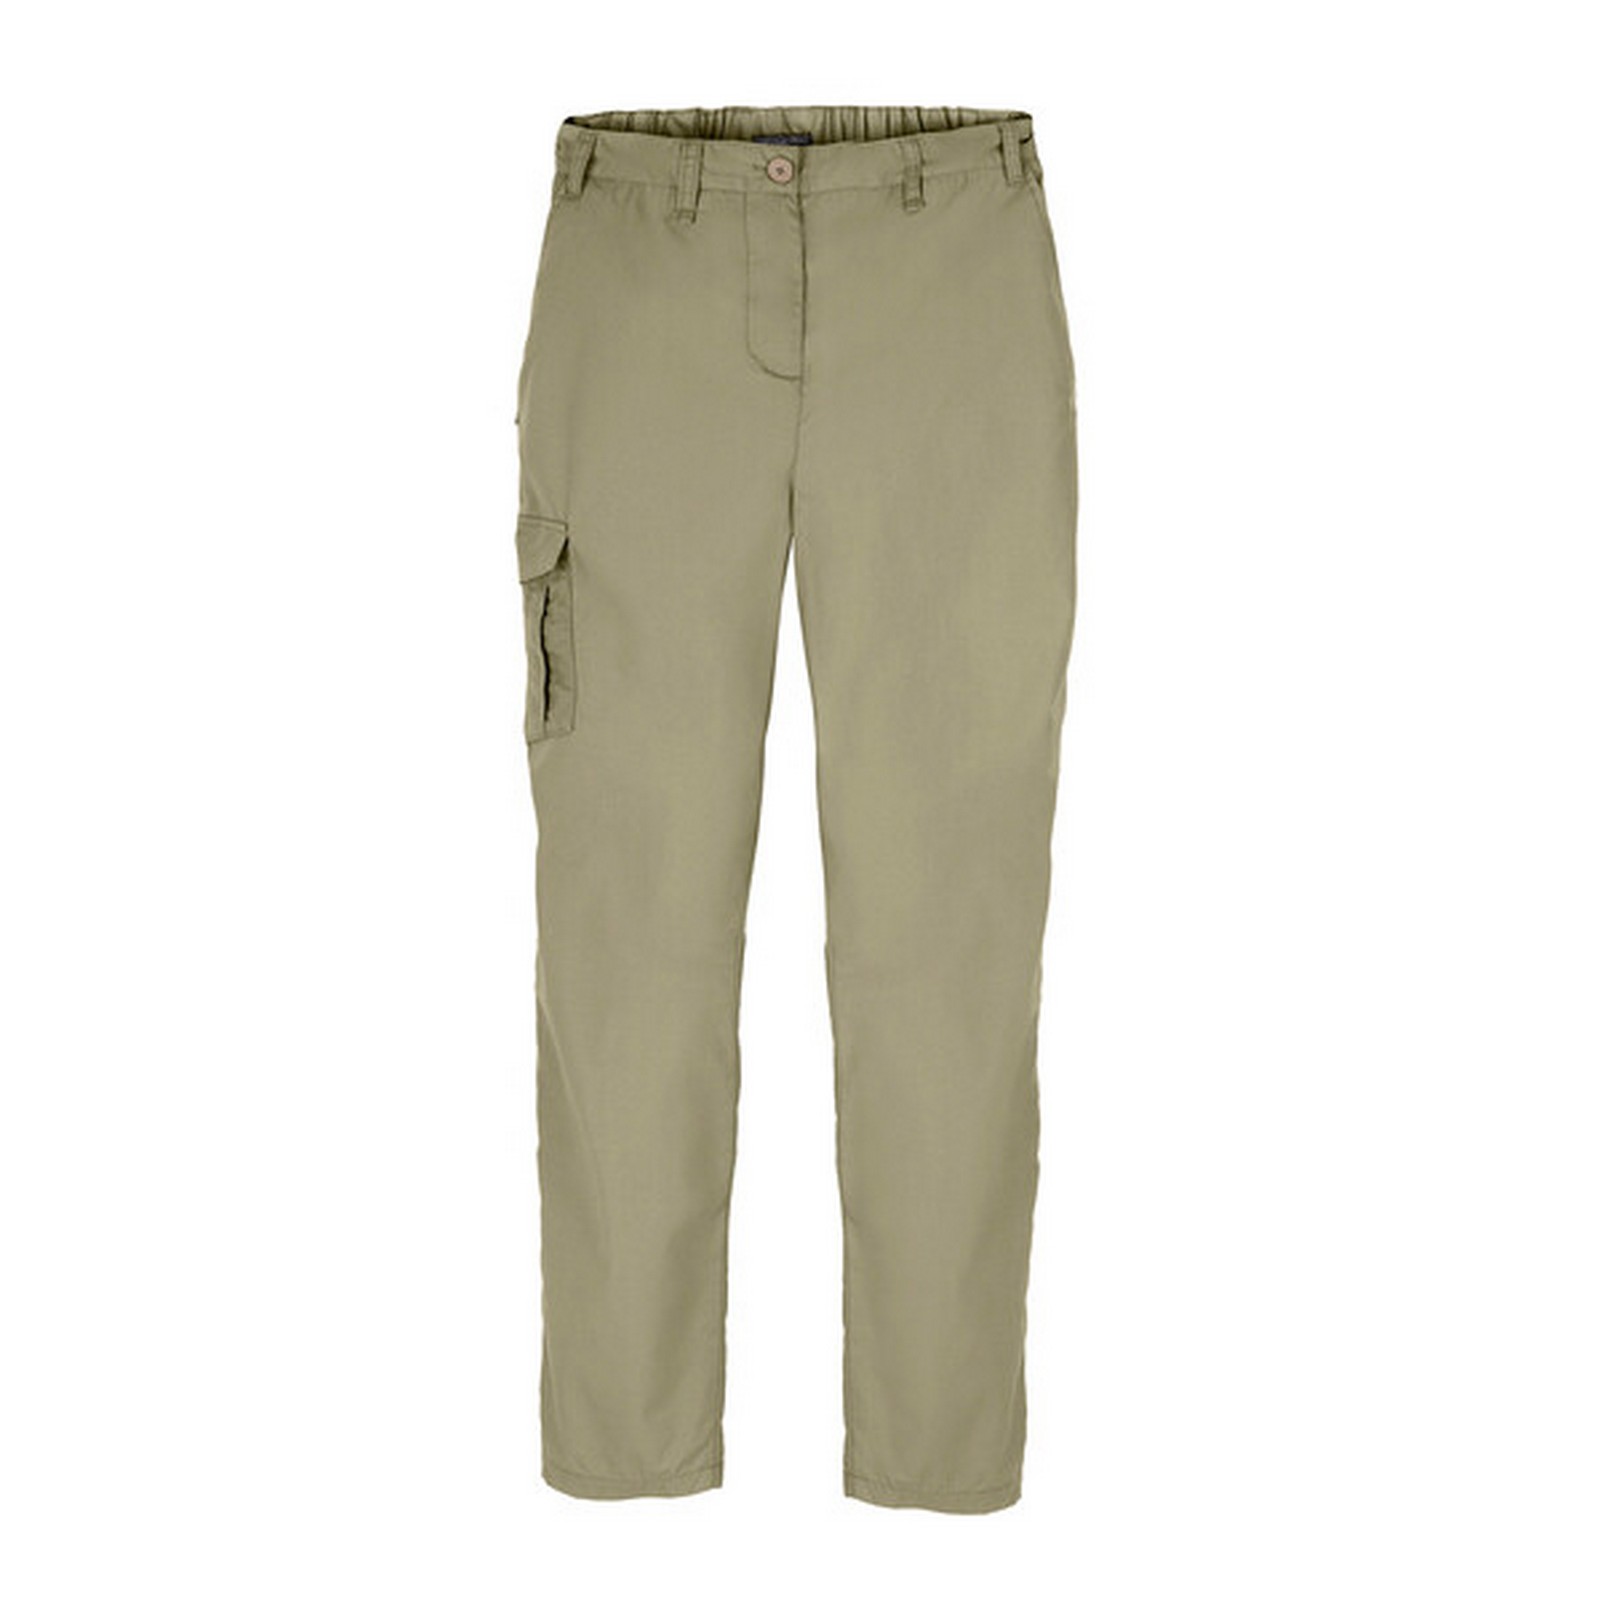 Craghoppers Womens Verve Adventure Fit Walking Trousers | Outdoor Look